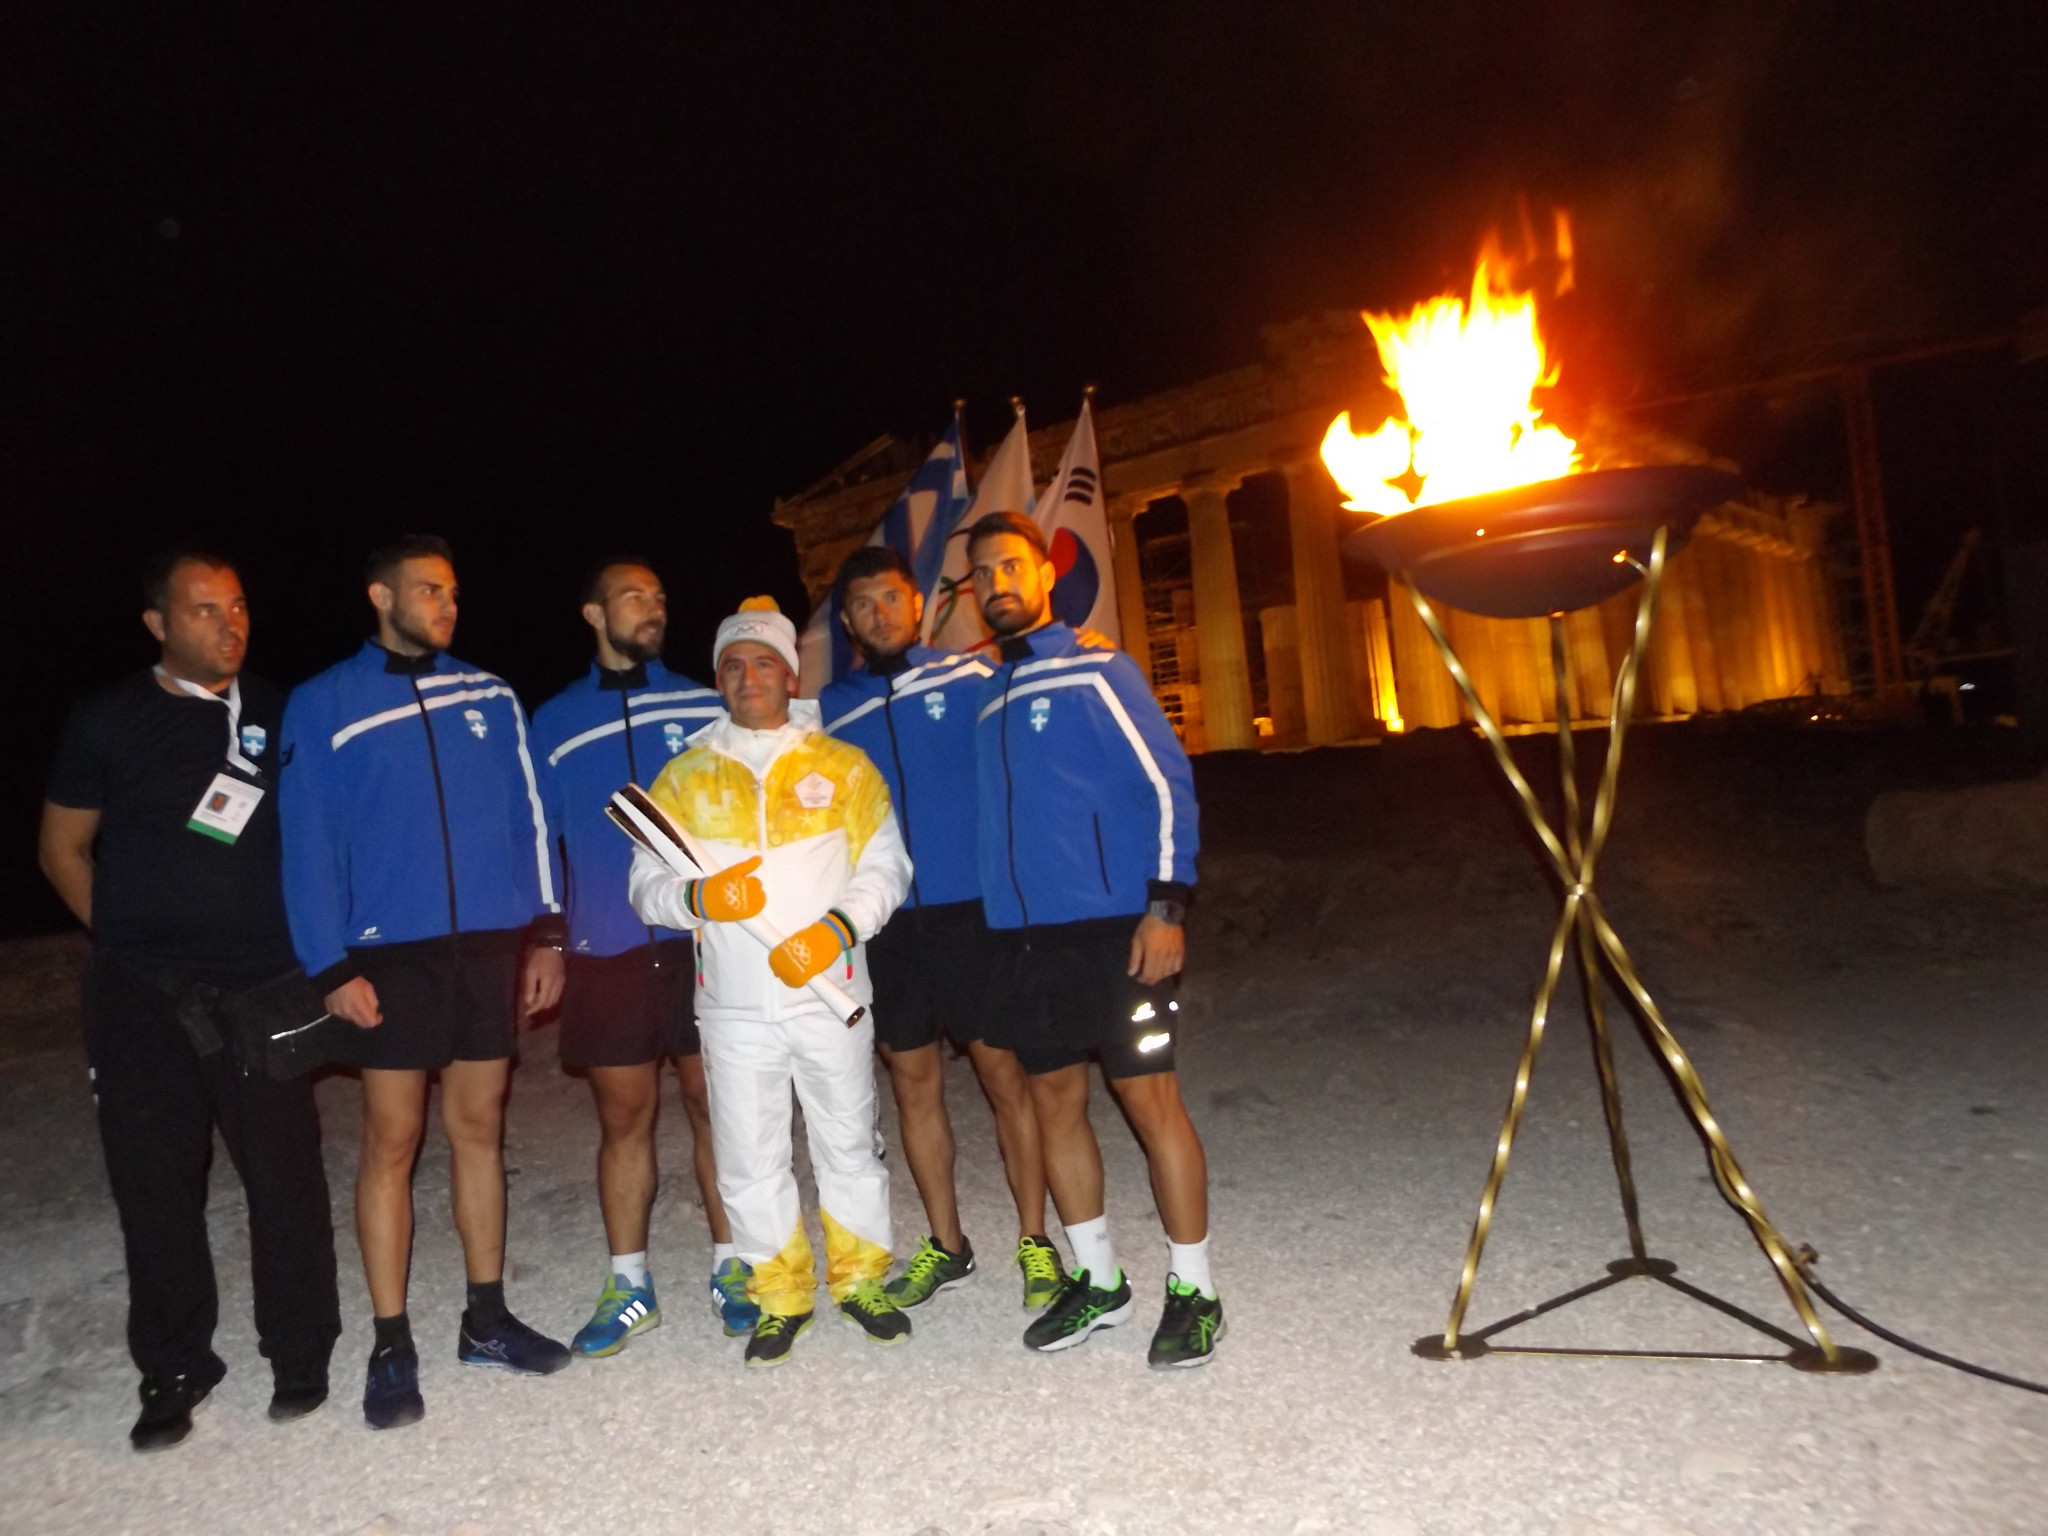 Olympic flame burns at the Parthenon as prepares for handover to Pyeongchang 2018